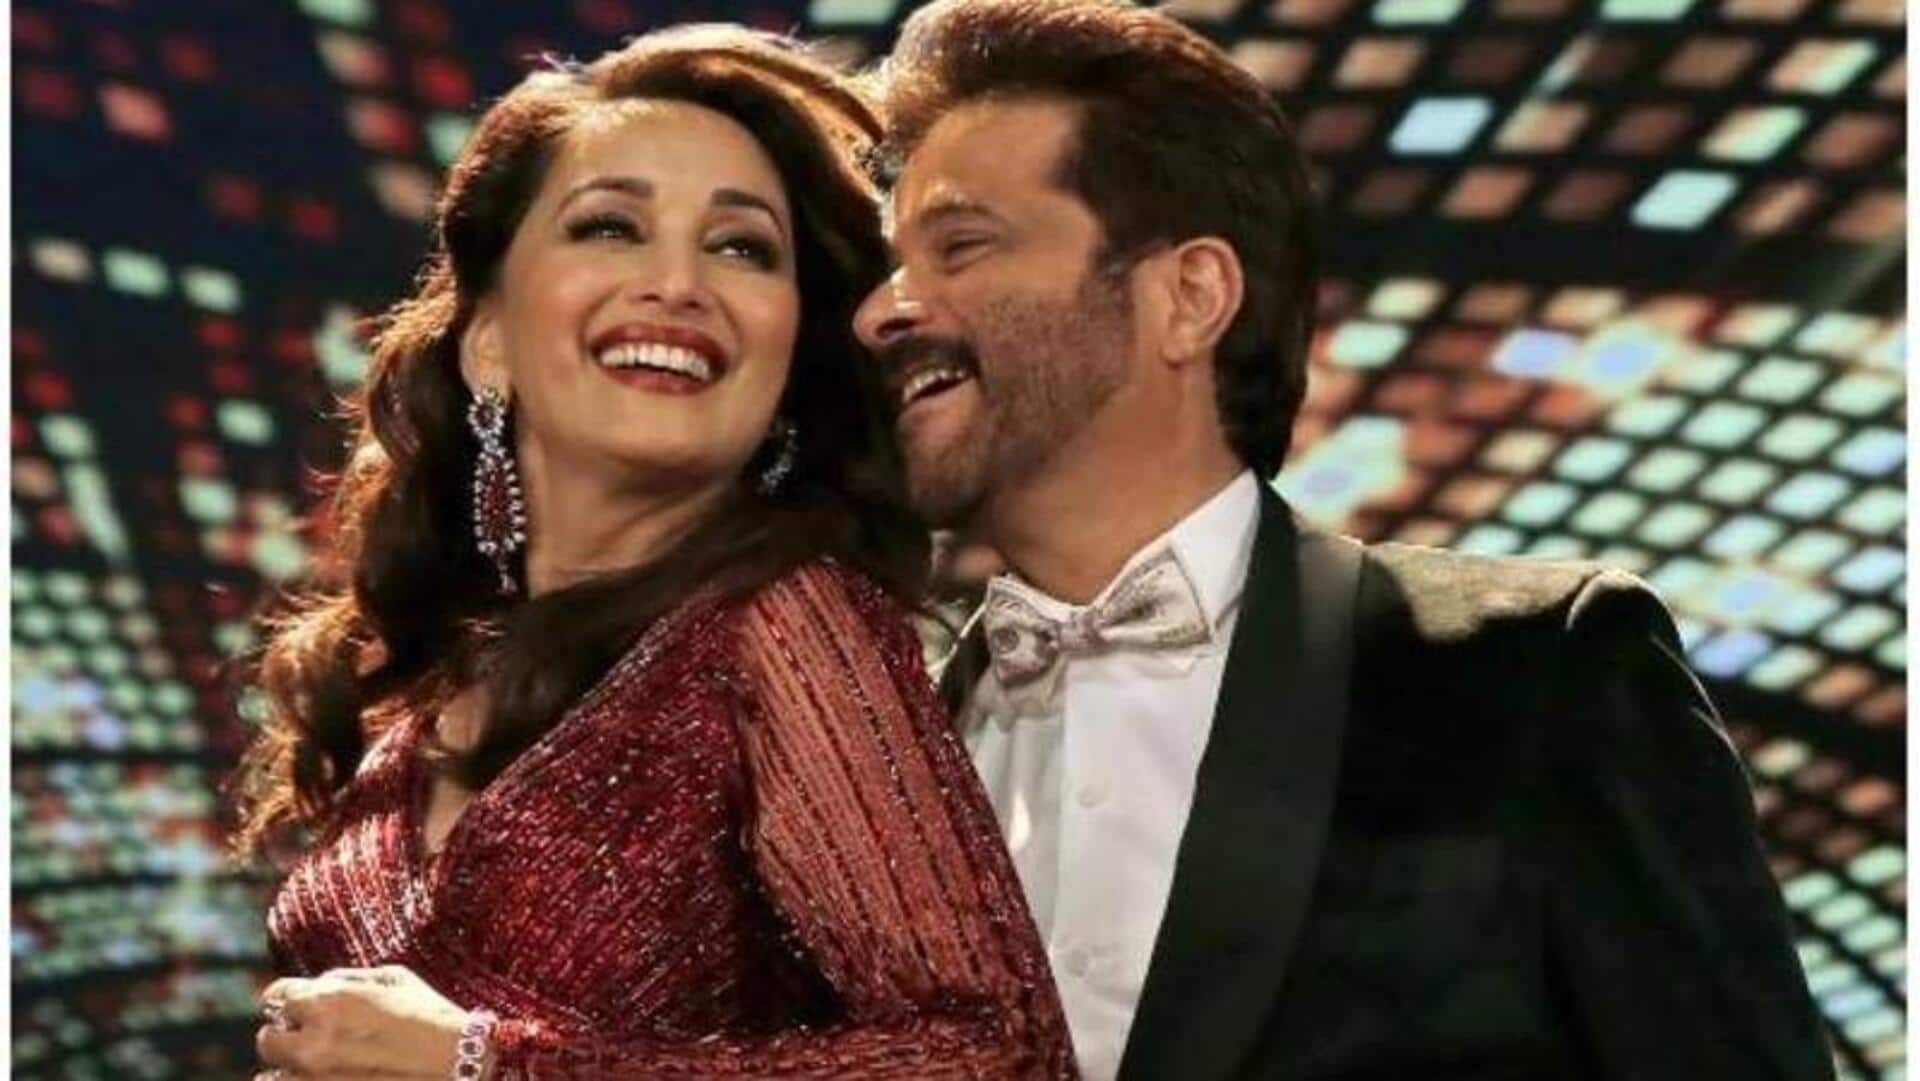 Birthday special: Anil Kapoor's best films with Madhuri Dixit